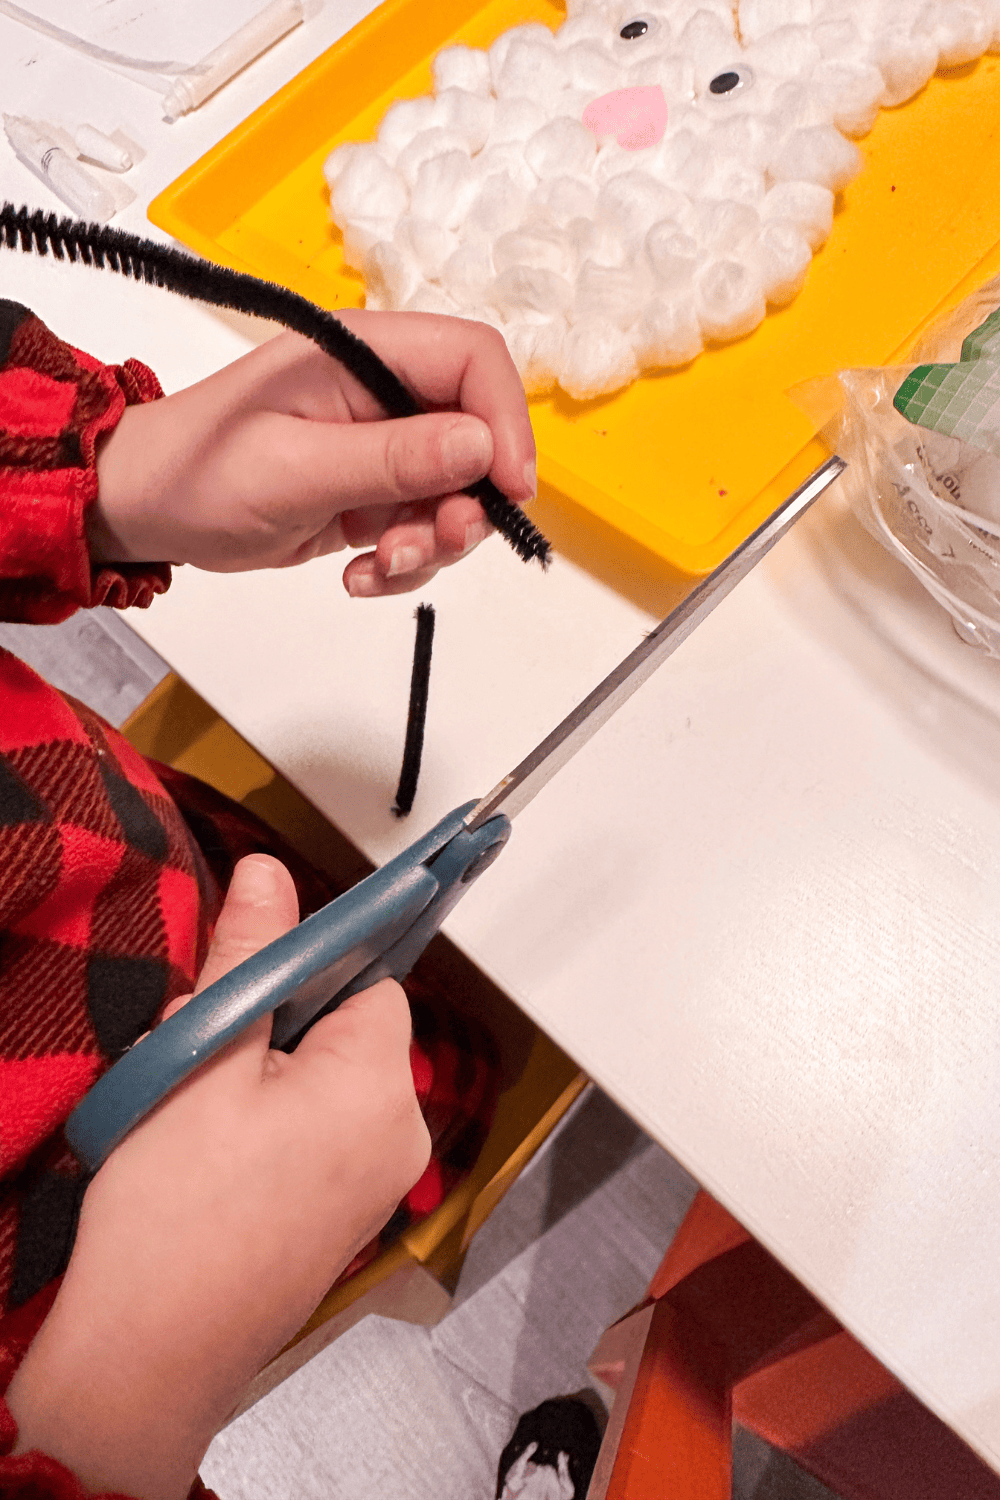 small hands holding scissors in one hand and black pipe cleaner in the other, cotton balls in the background